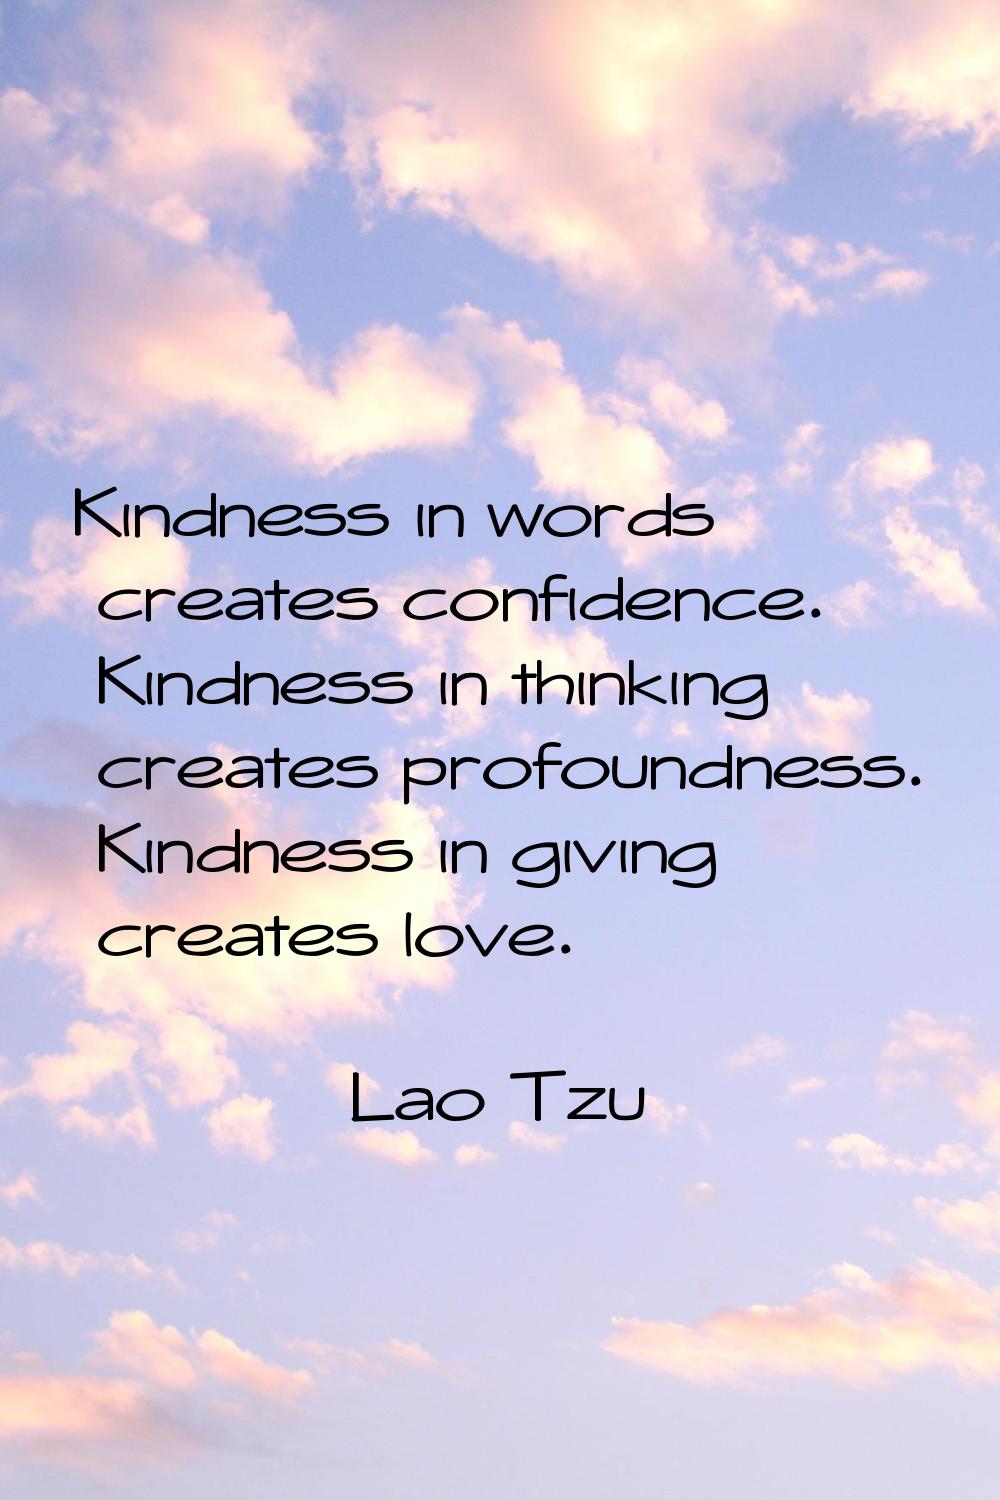 Kindness in words creates confidence. Kindness in thinking creates profoundness. Kindness in giving